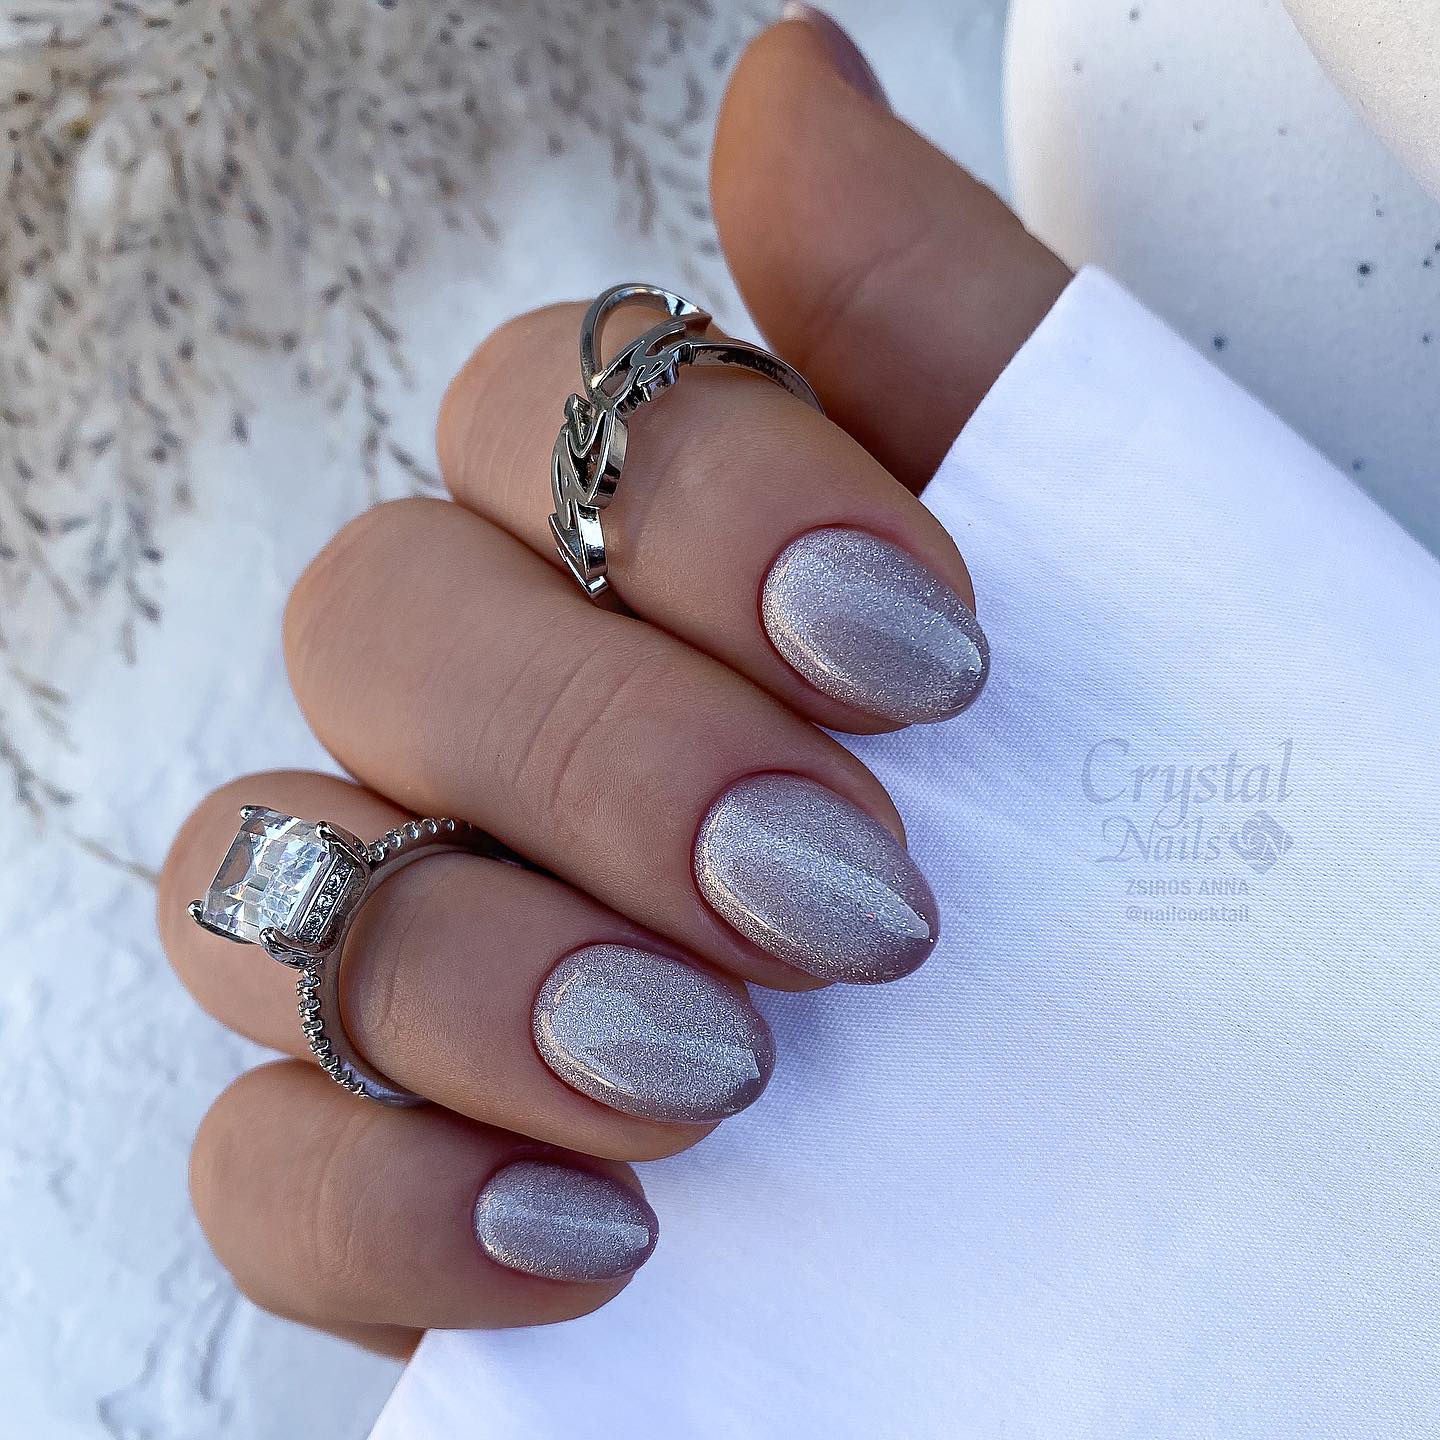 Short Round Grey Nails with Glitter